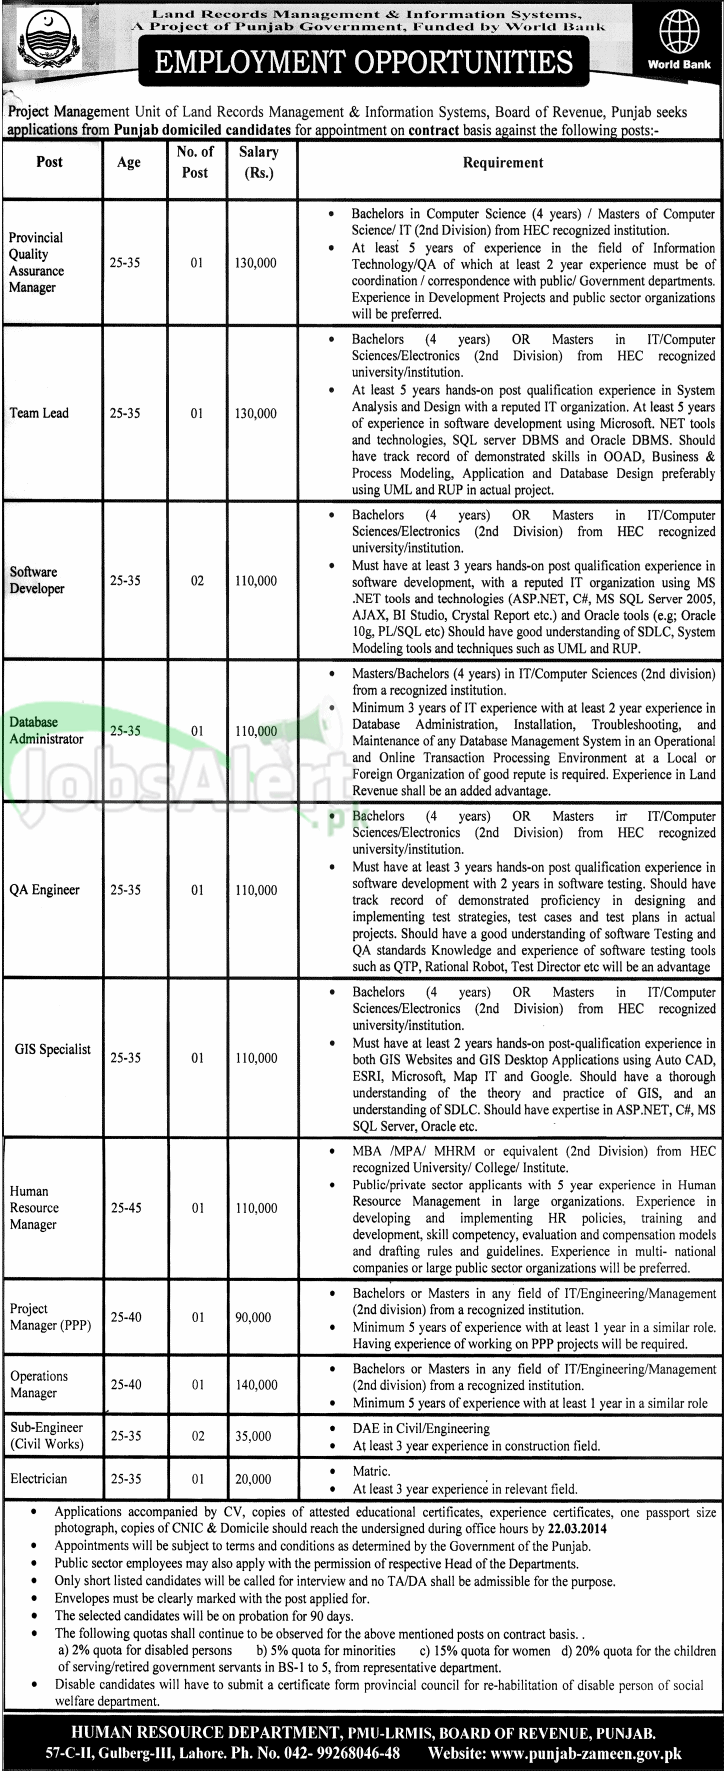 Govt Jobs in Lands Record Management Board of Revenue Lahore